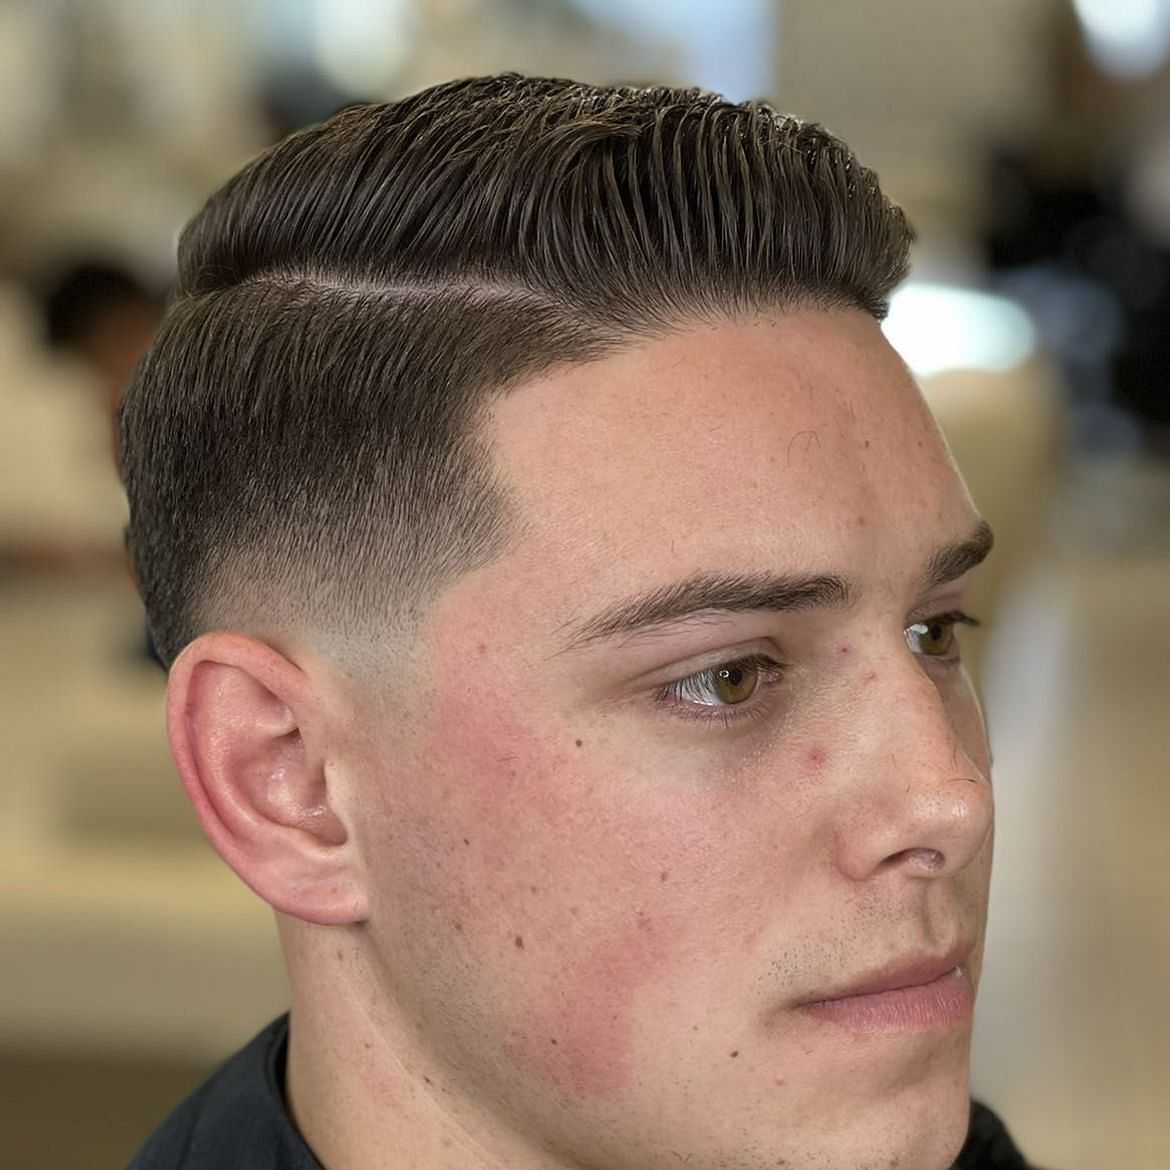 Man with a neat comb over haircut and fade sides.